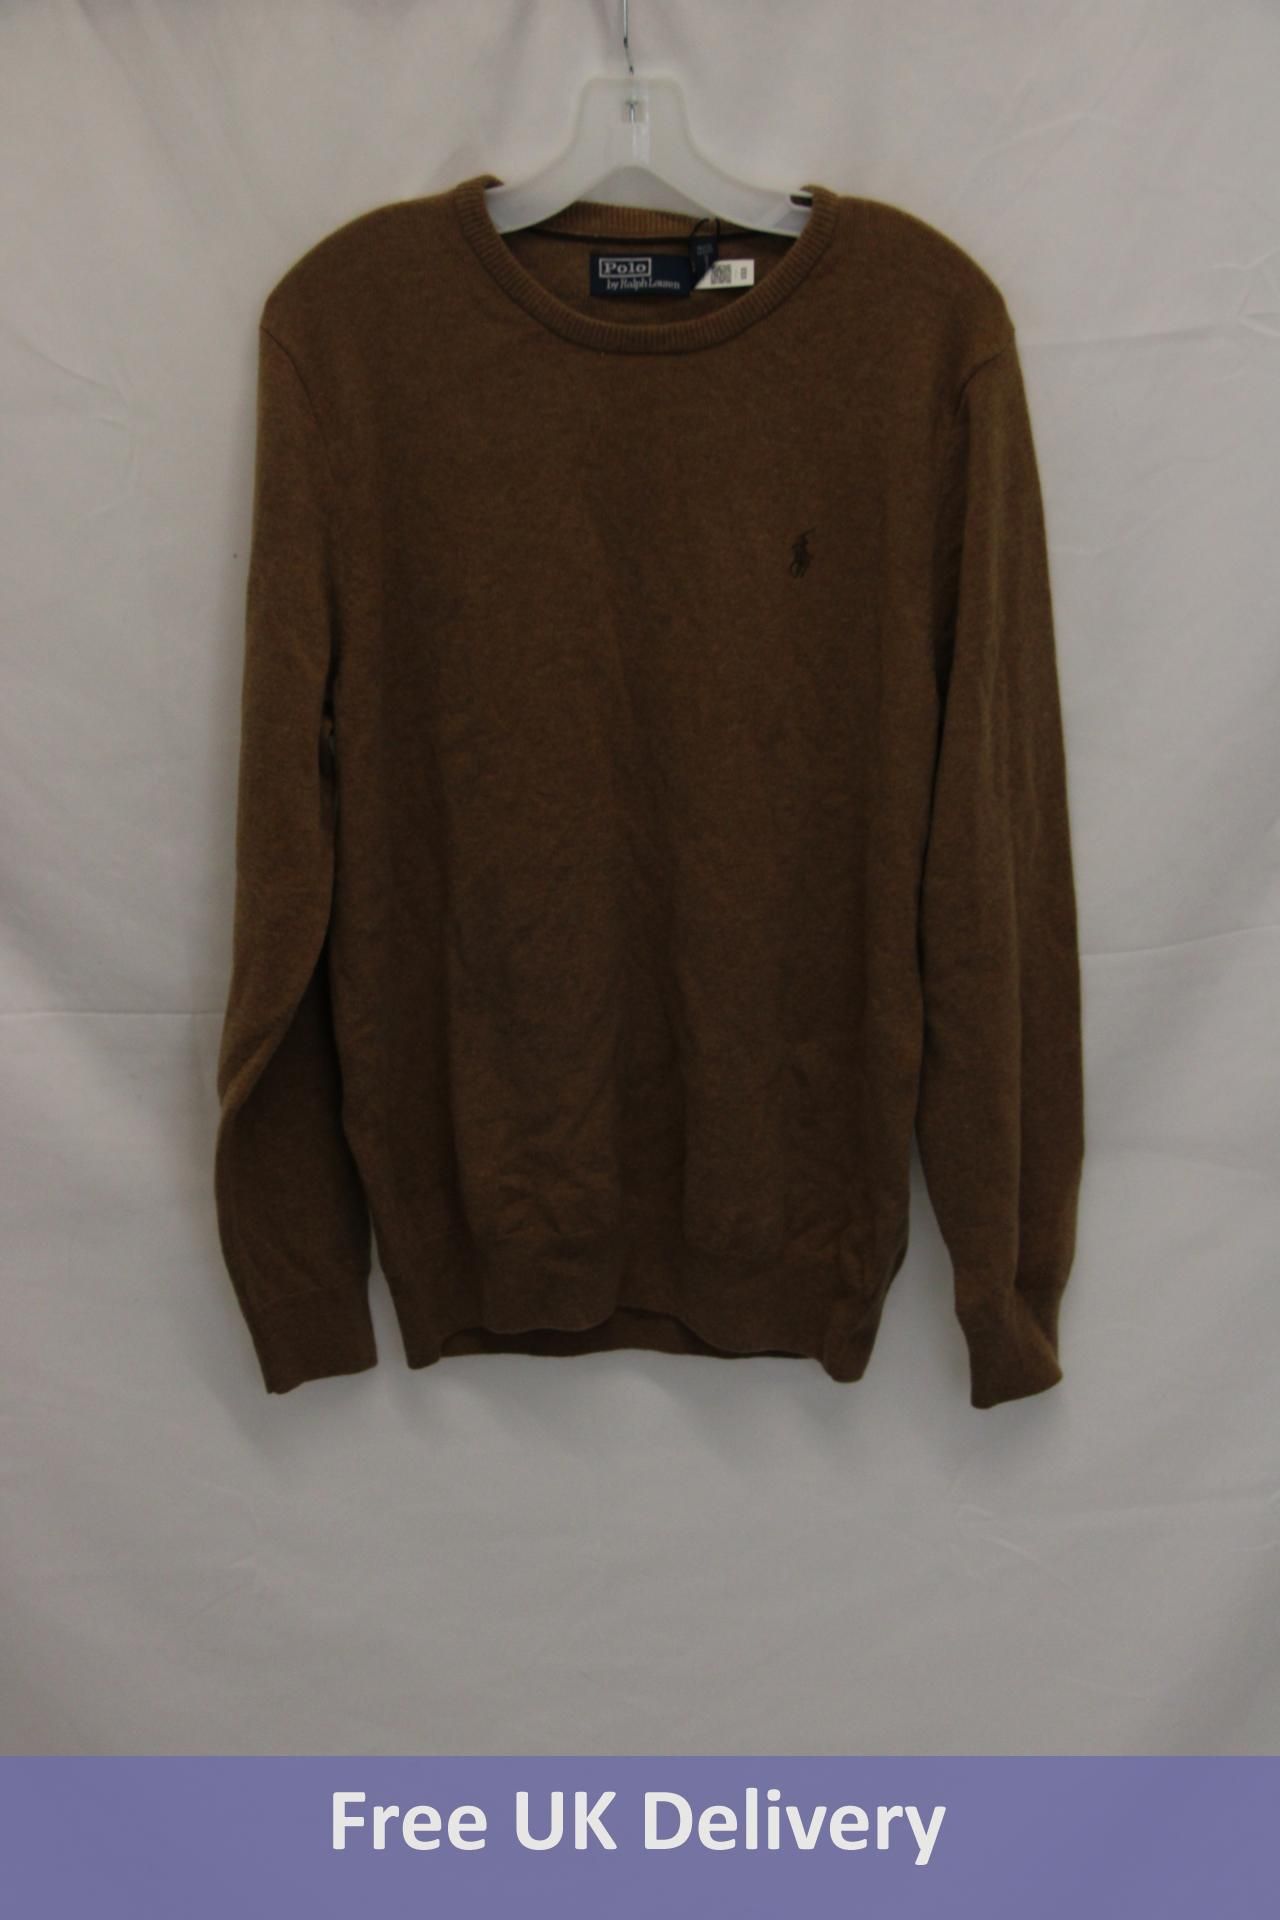 Polo Ralph Lauren Long-Sleeve Wool Sweater, Brown, Size X-Large